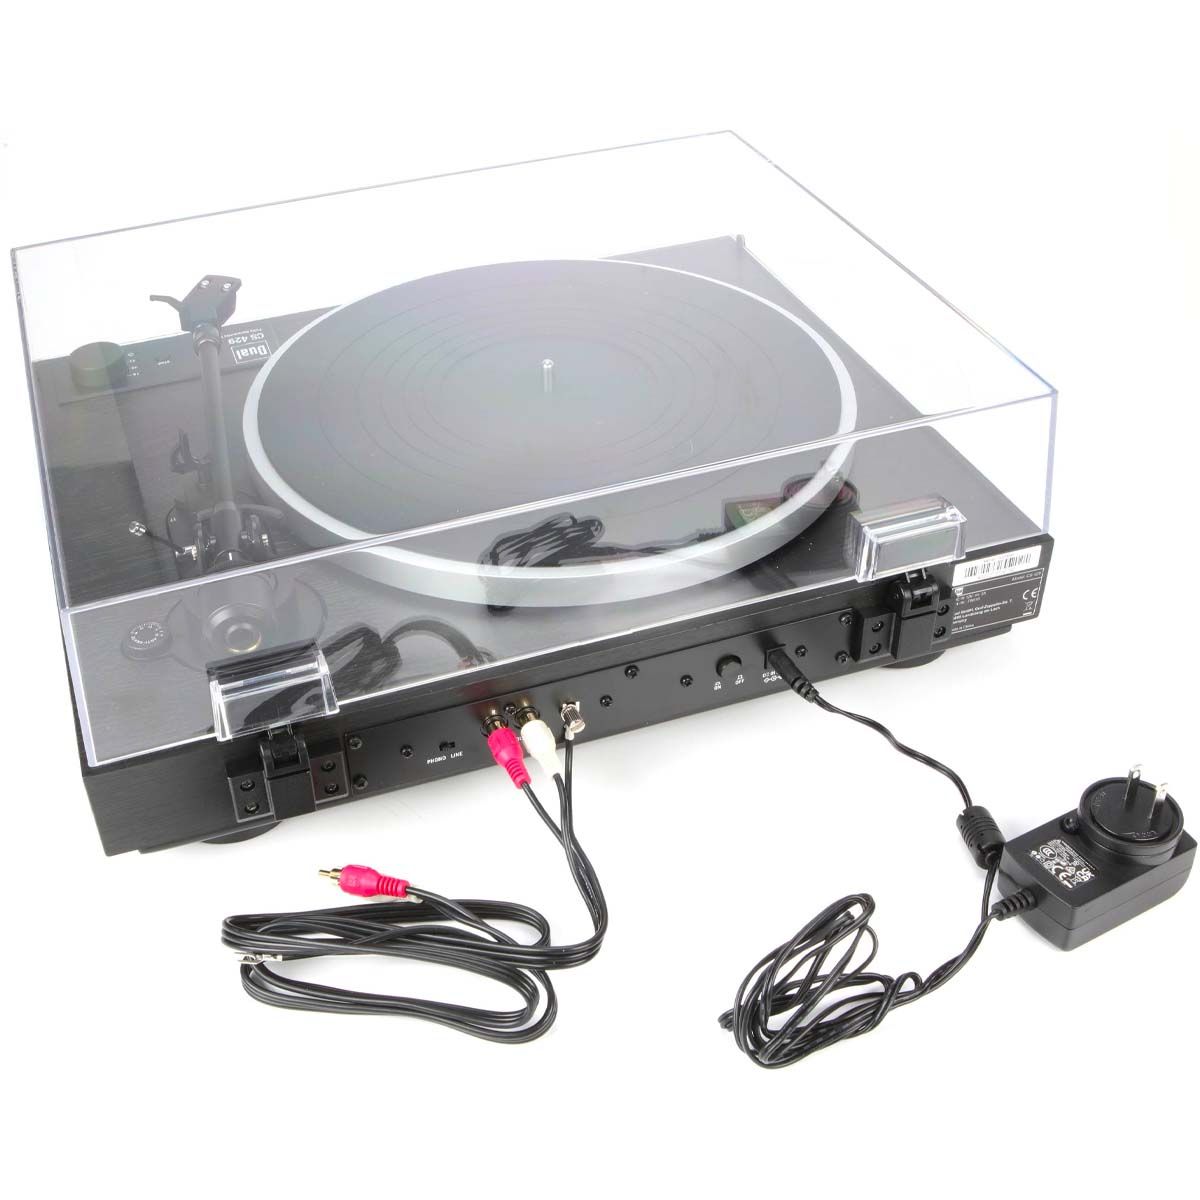 Dual CS429 Fully Automatic HiFi Turntable - rear view with connections